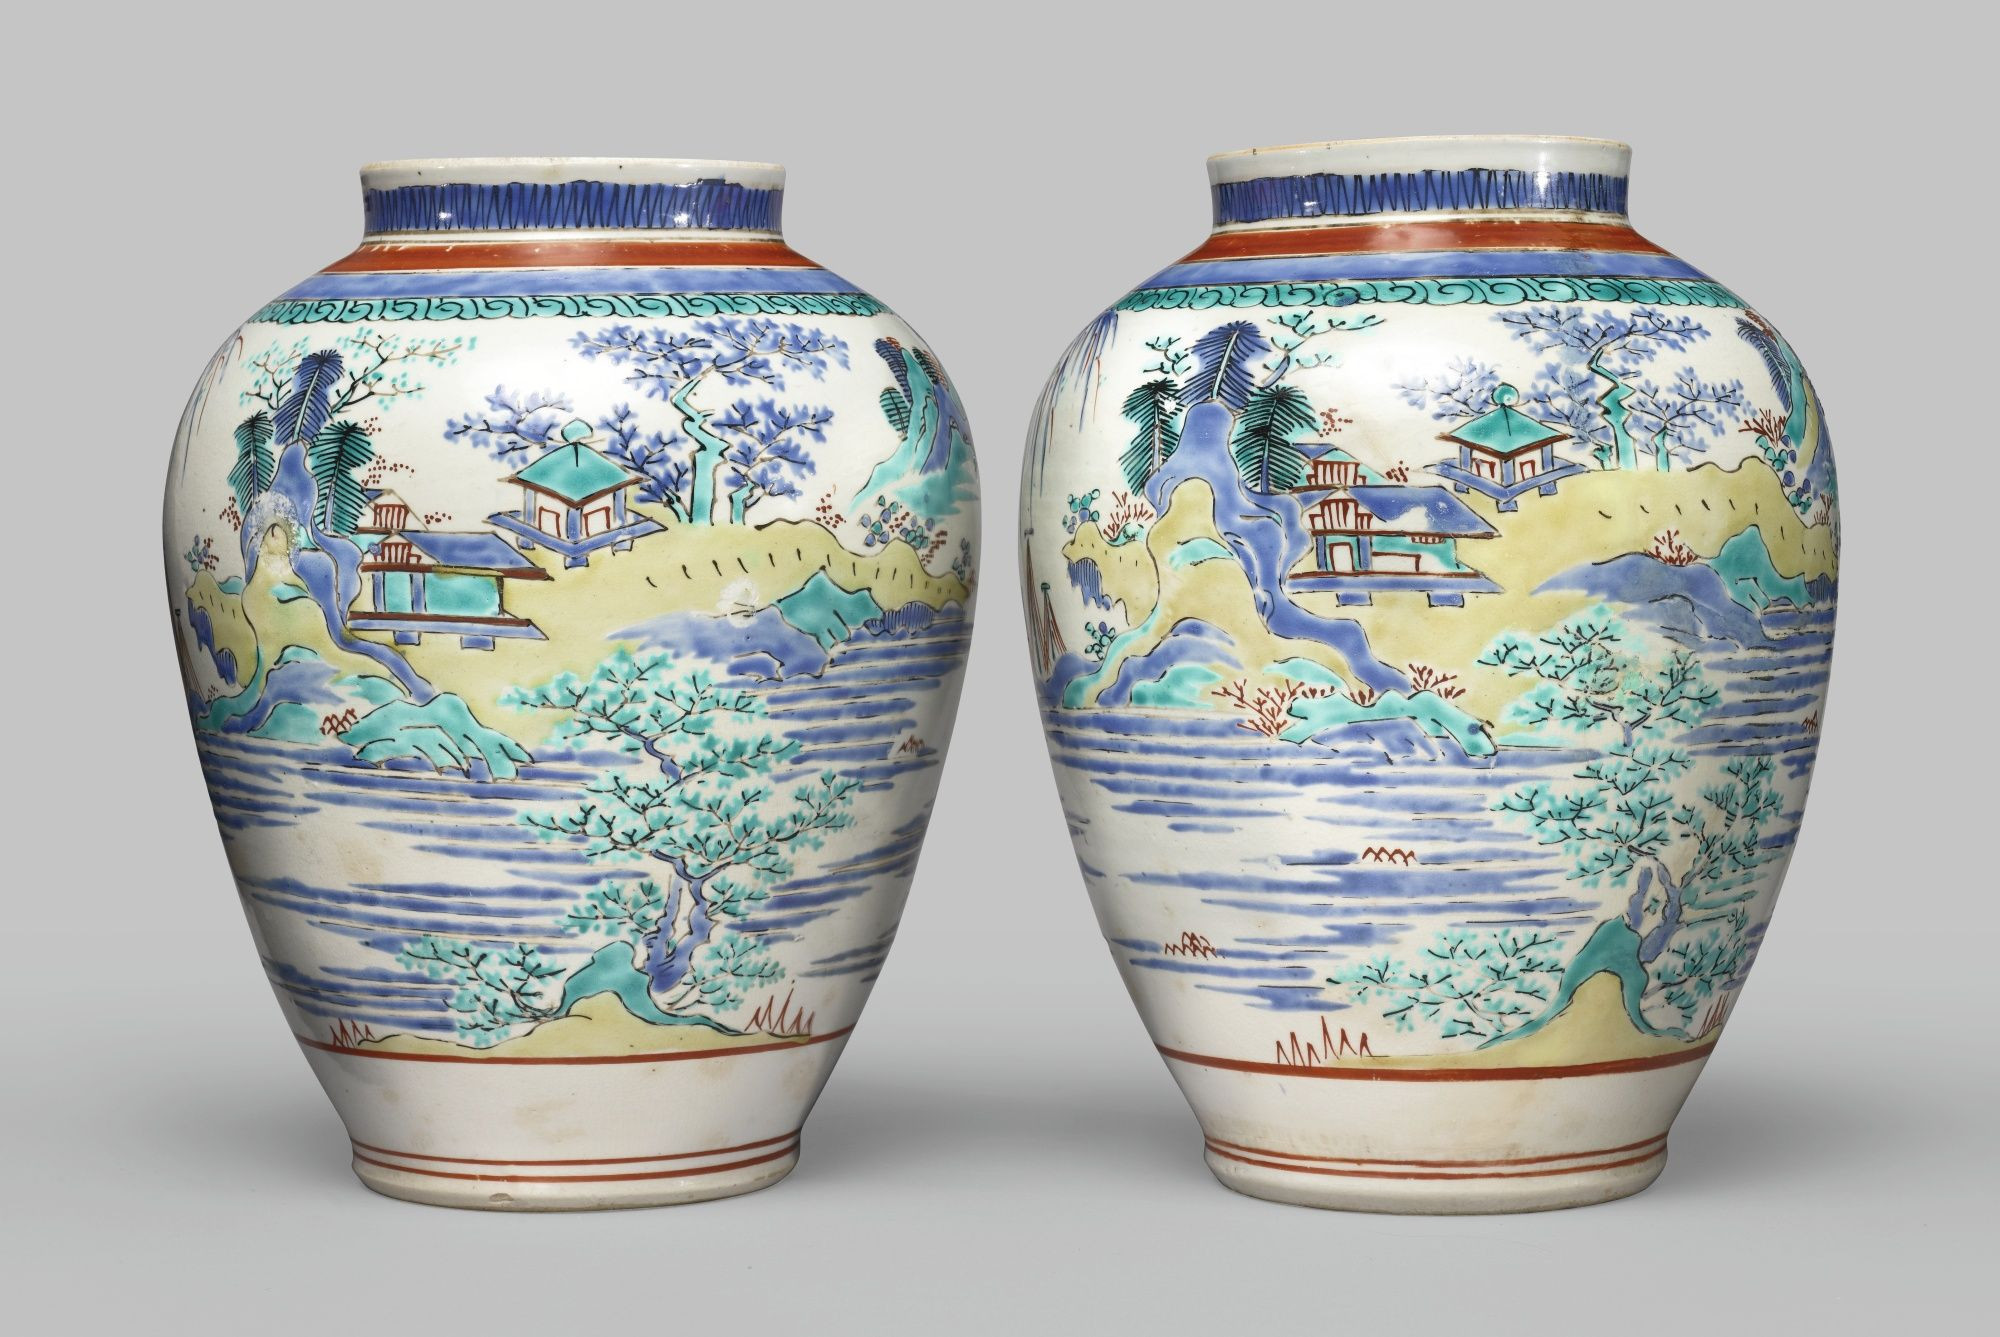 18 Lovely Antique Wedgwood Vase 2024 free download antique wedgwood vase of a pair of large kakiemon vases japan late 17th century each of with a pair of large kakiemon vases japan late 17th century each of ovoid form decorated in overglazed